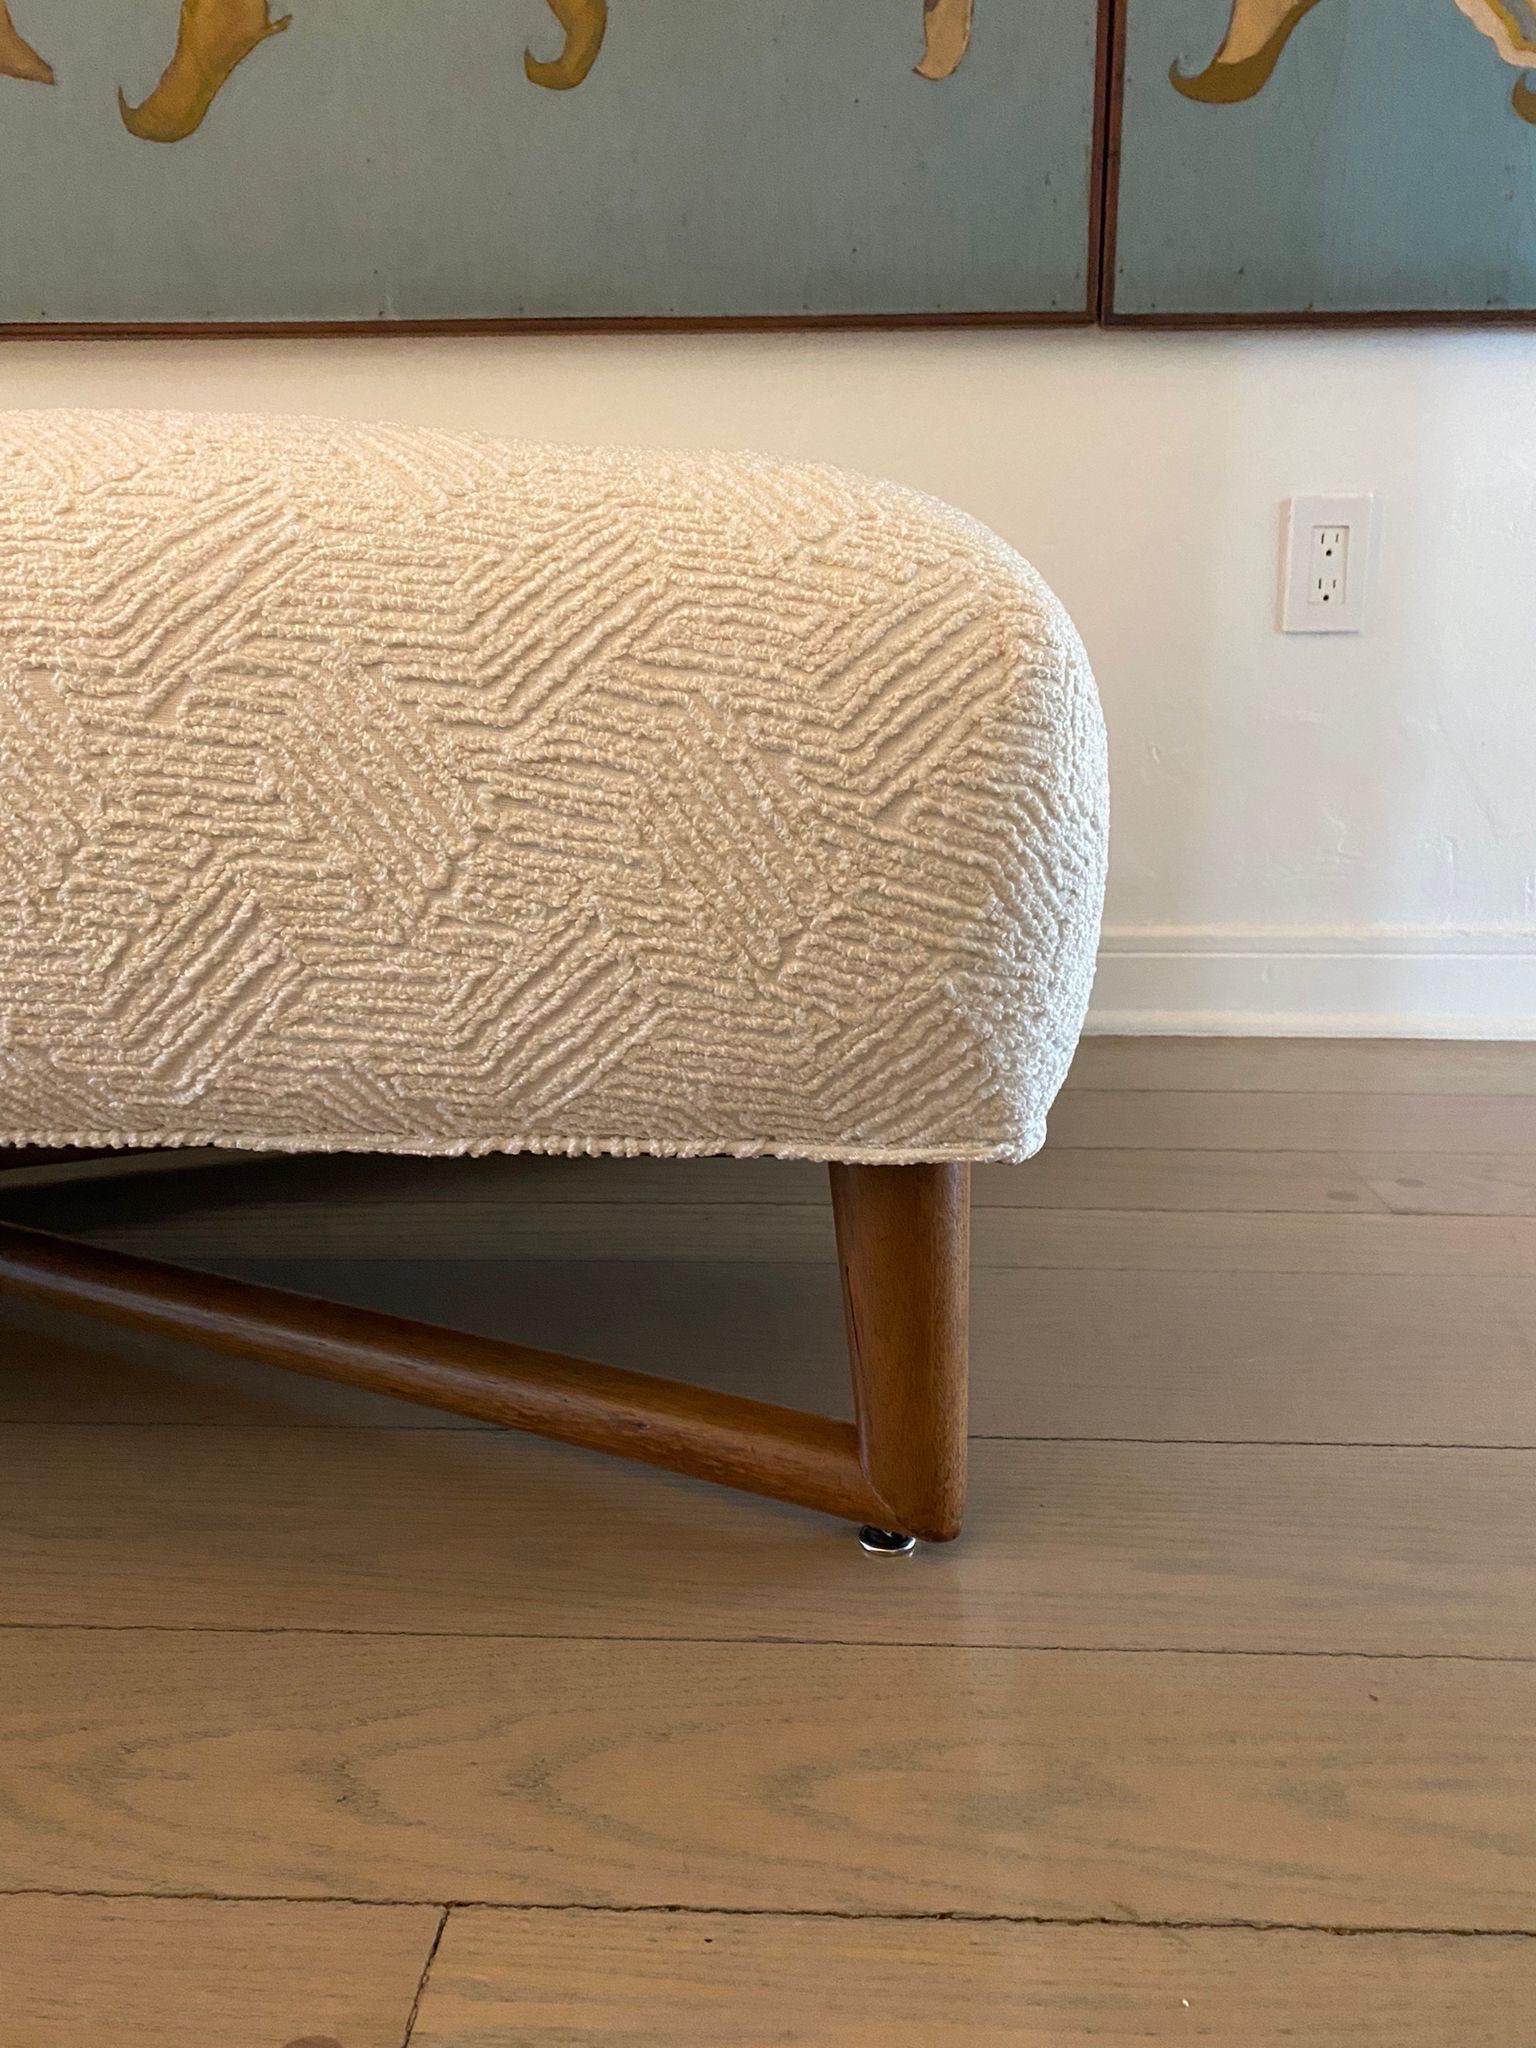 A VERY comfortable walnut wood X-frame base bench which is likely a special commission for Robsjohn-Gibbings. We have TWO benches, sold separately. Newly upholstered.  THIS ITEM IS LOCATED AND WILL SHIP FROM OUR EAST HAMPTON, NY SHOWROOM.